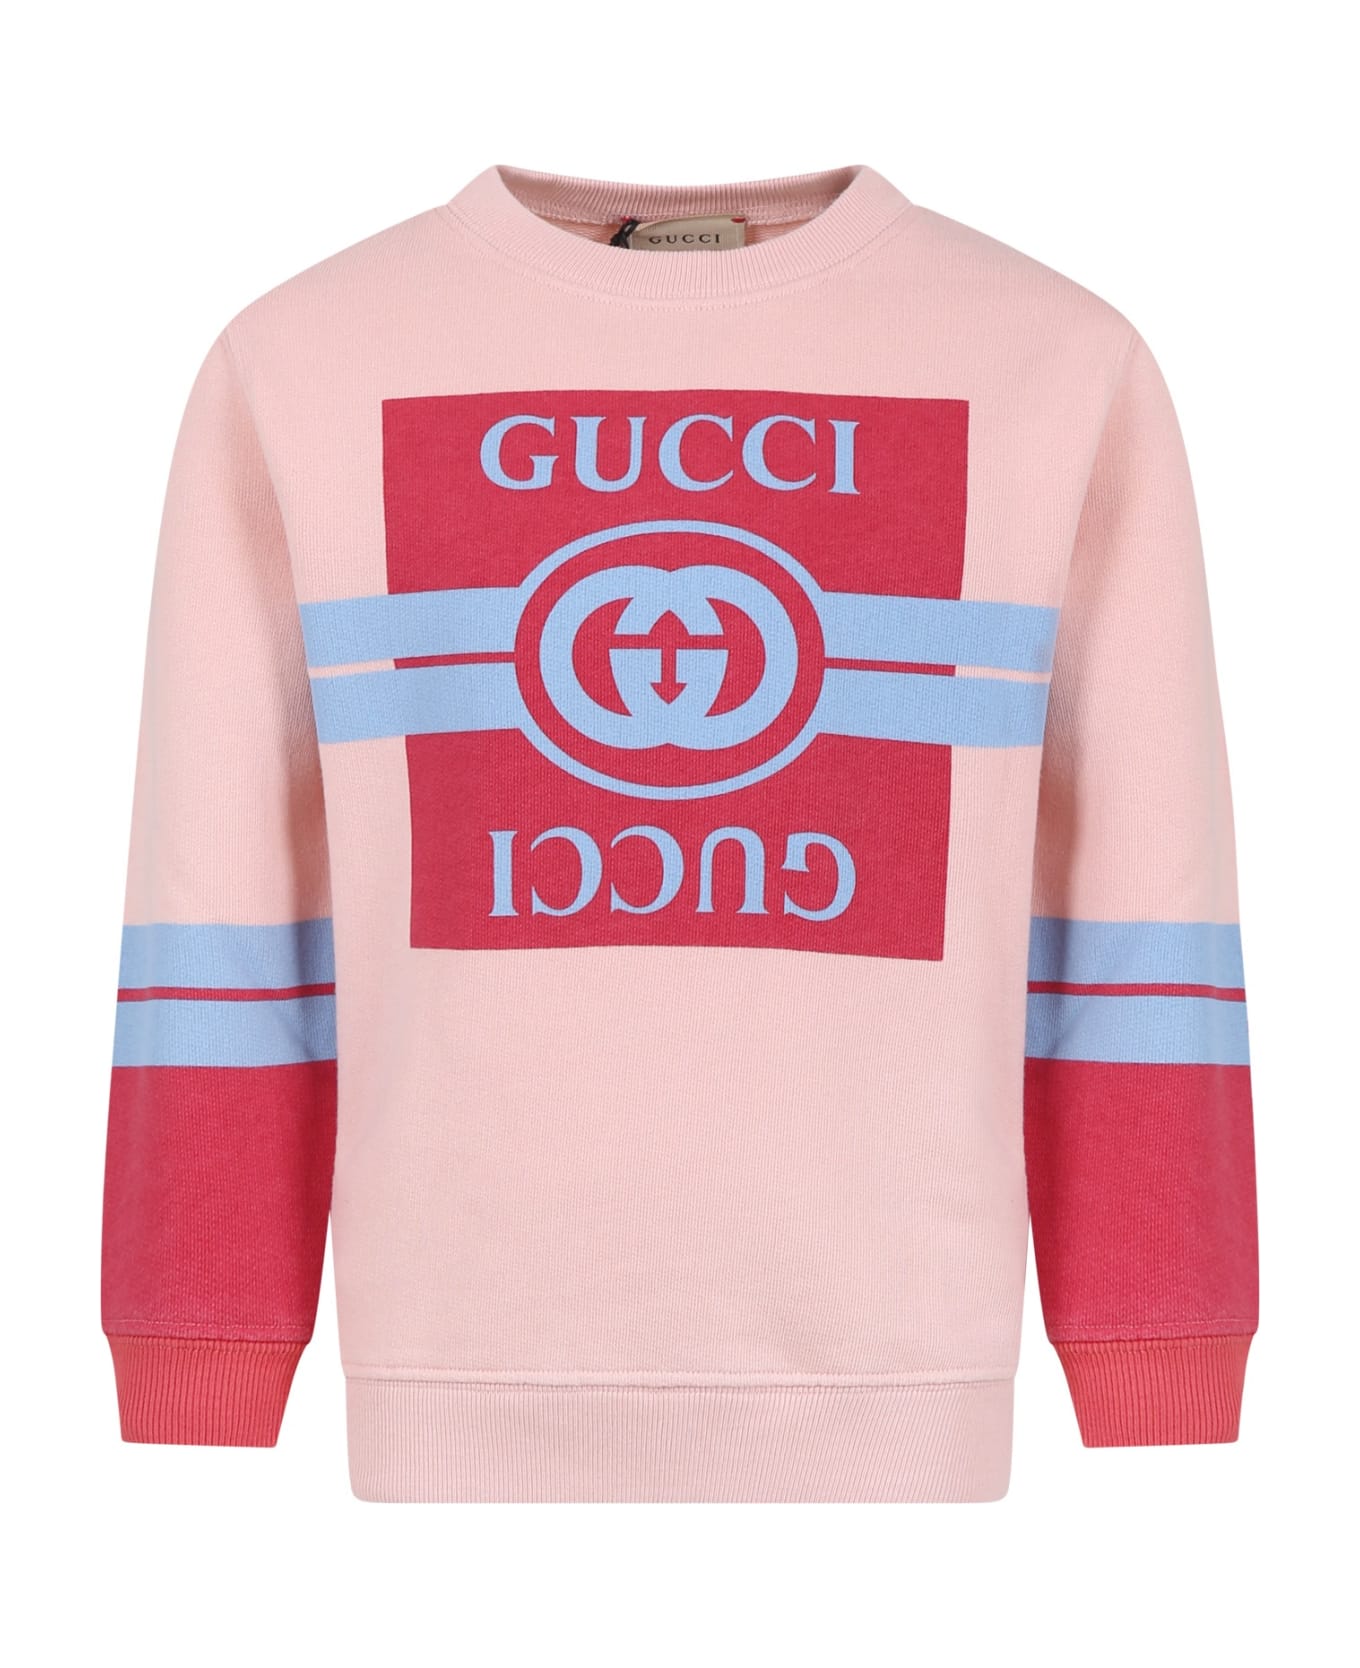 Gucci Rose Sweatshirt For Girl With Logo - PINK